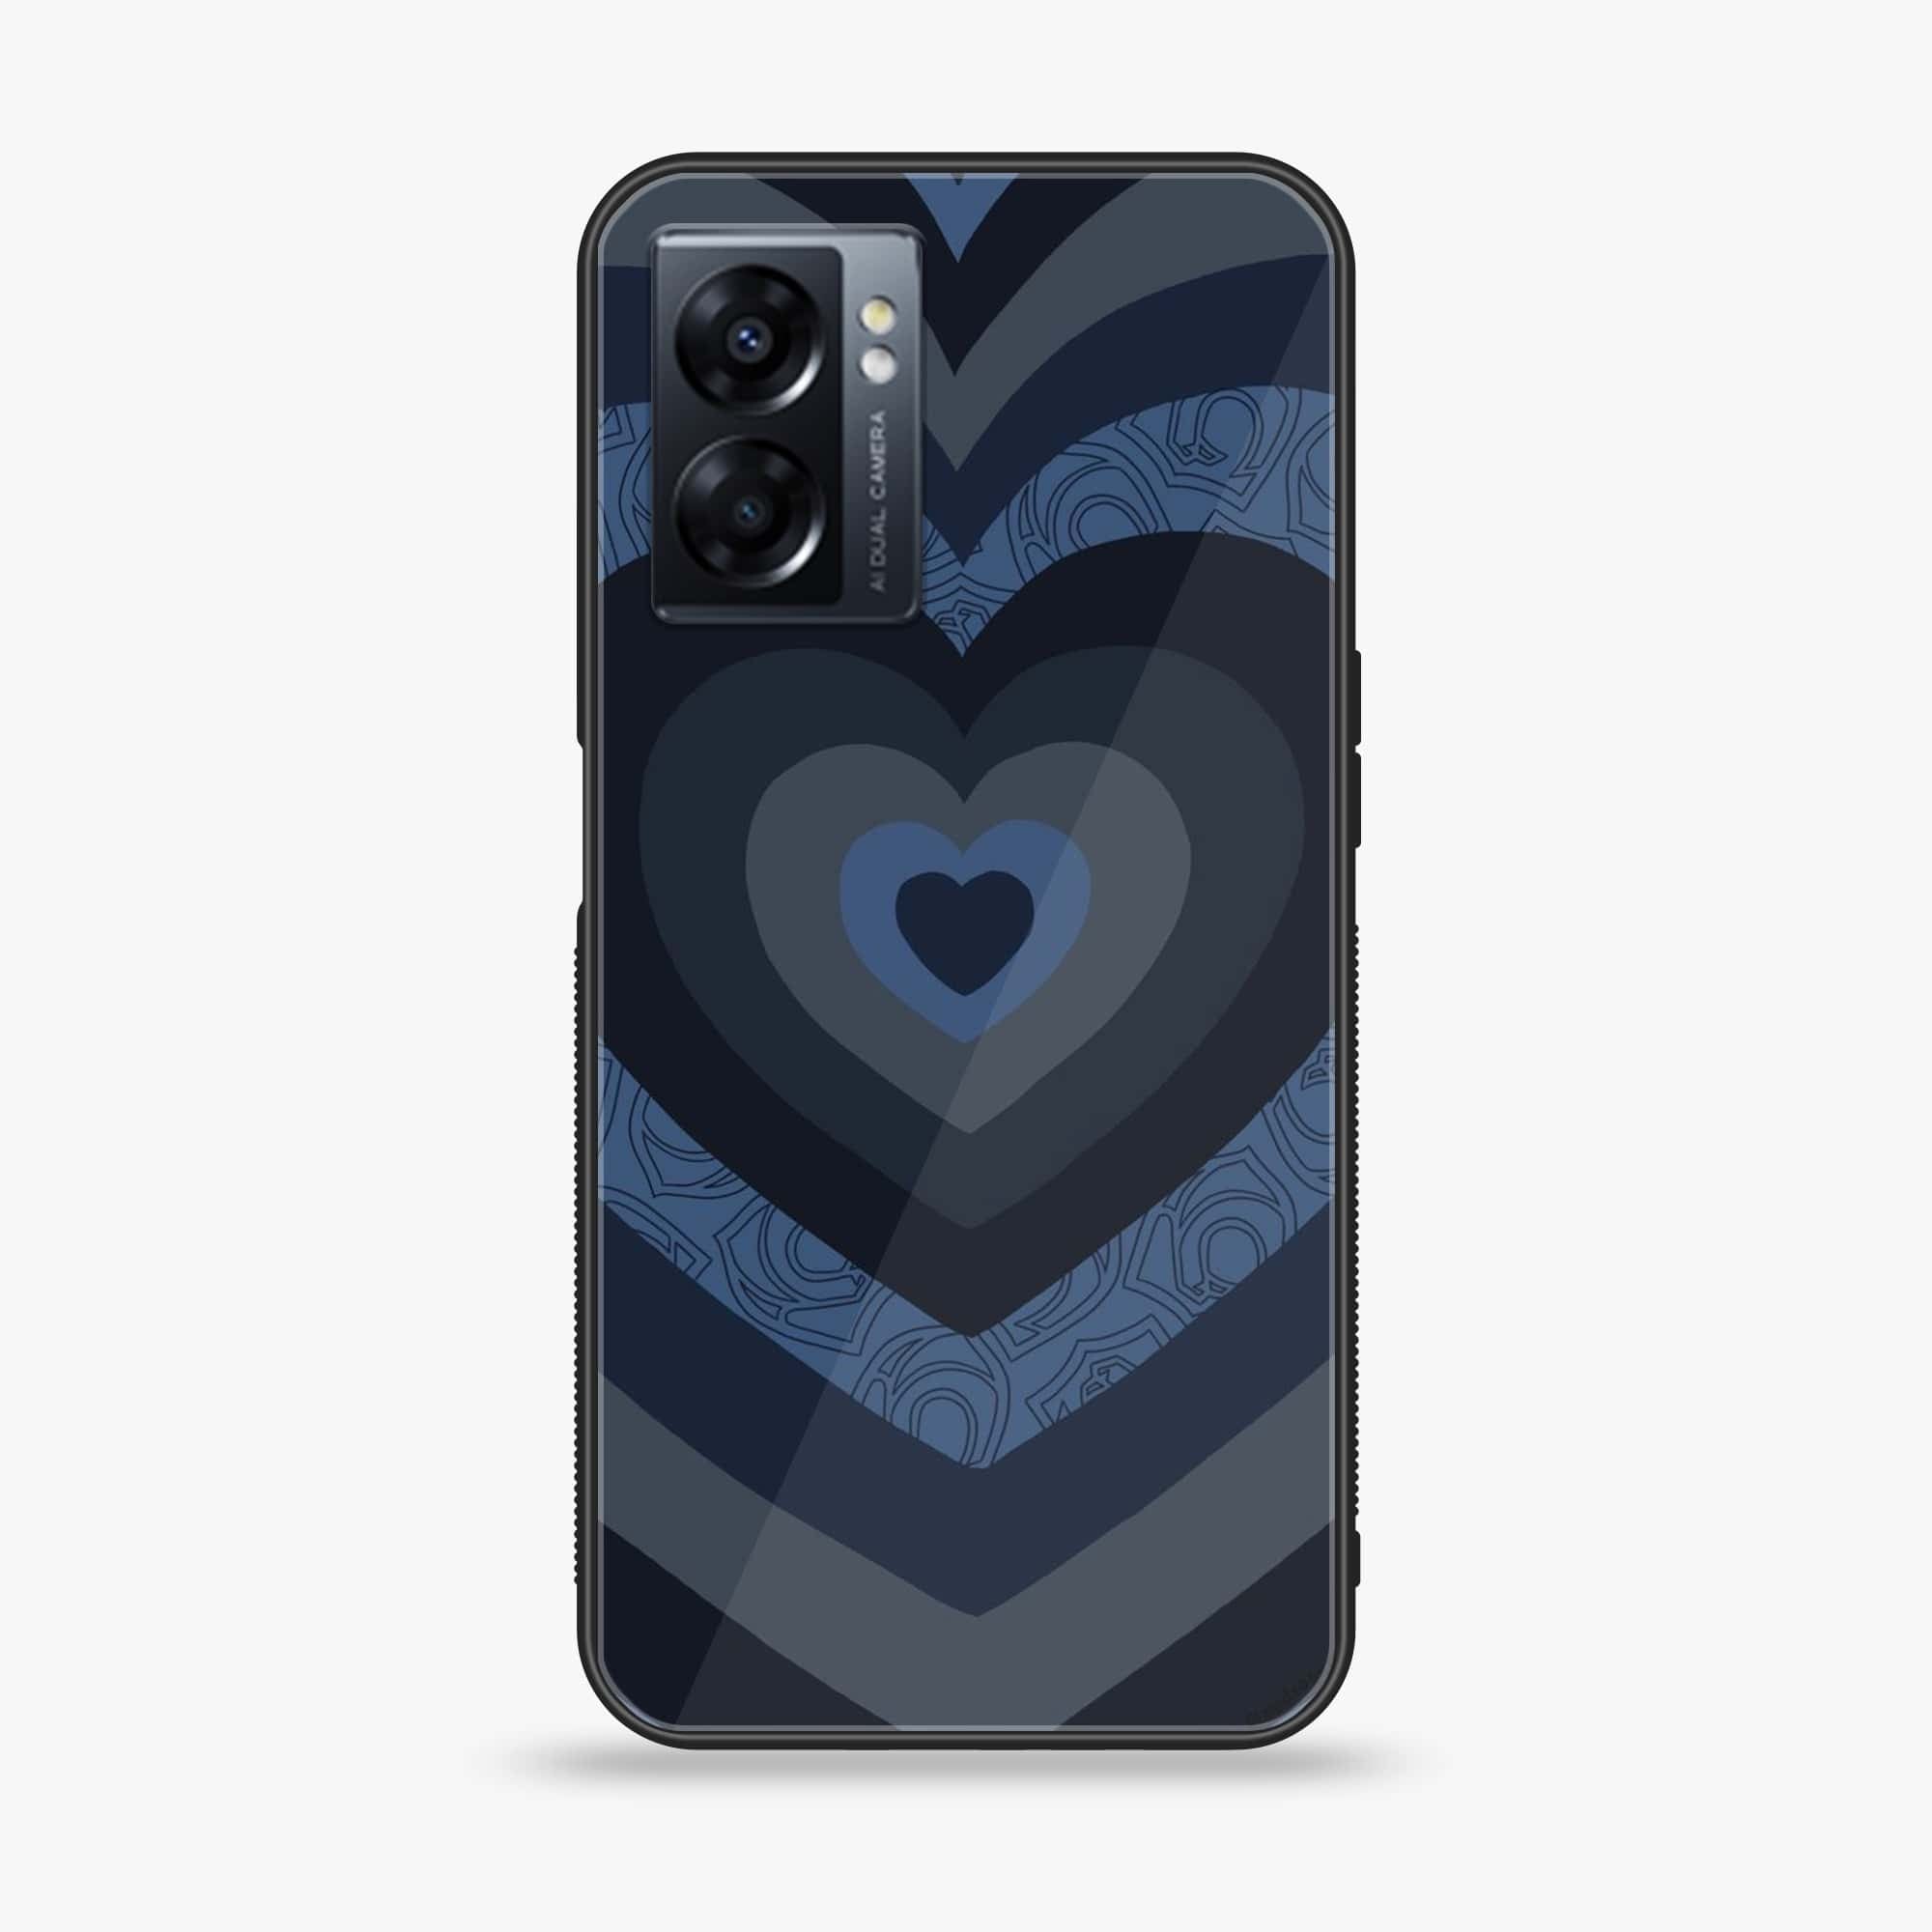 Oppo A77s - Heart Beat Series 2.0 - Premium Printed Glass soft Bumper shock Proof Case